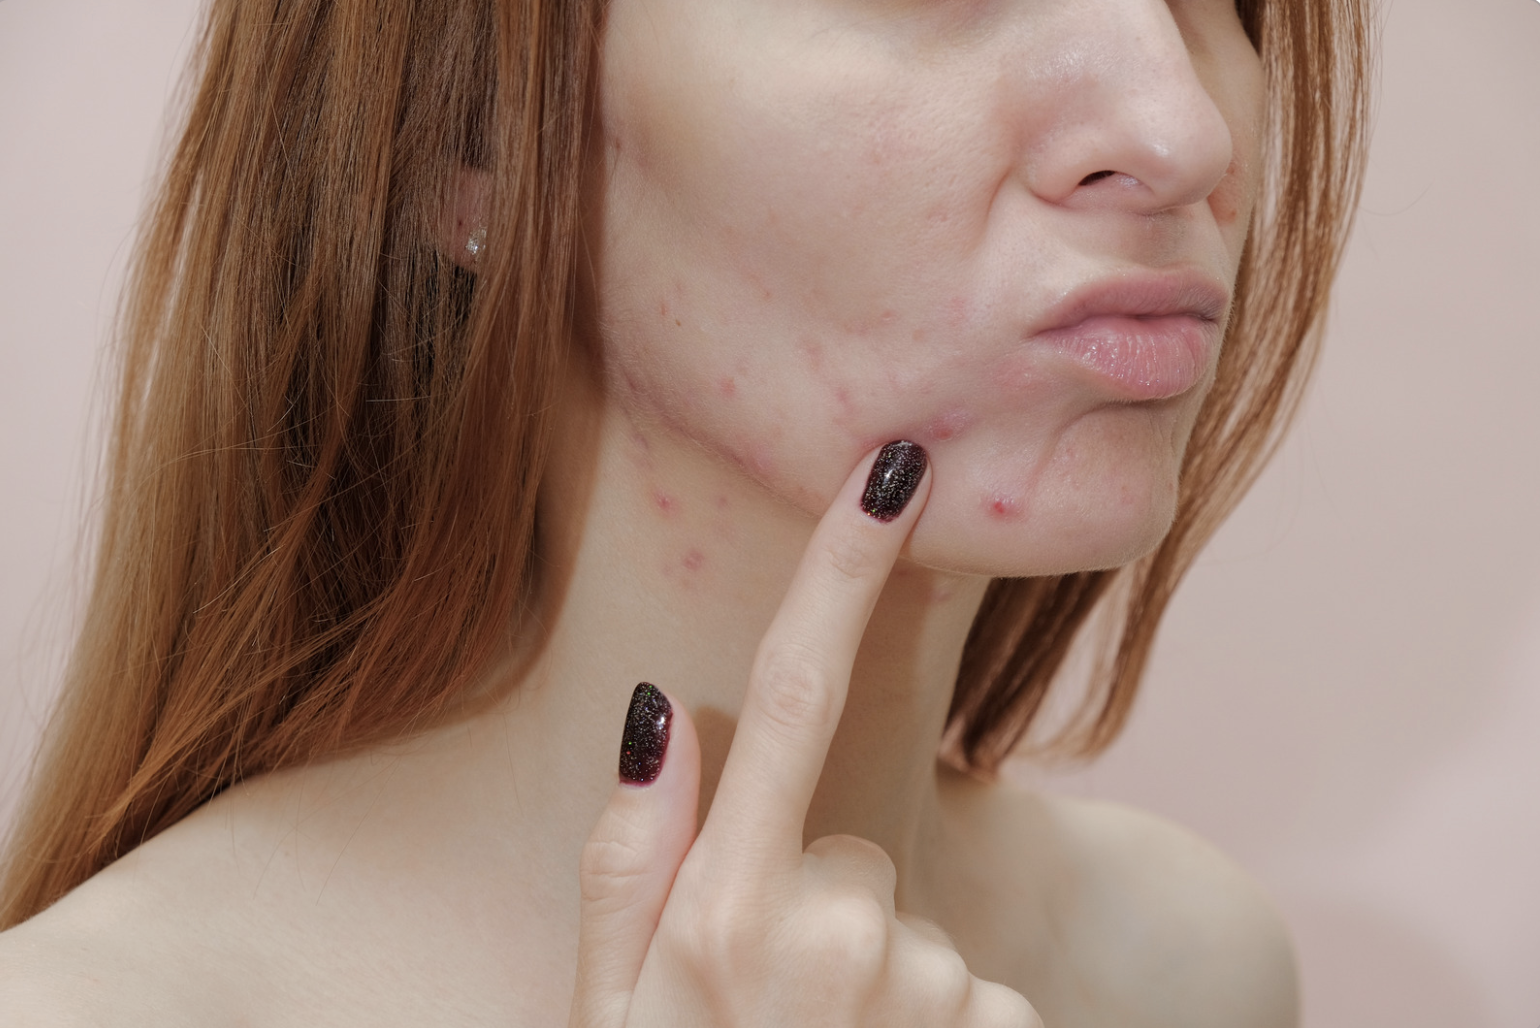 What causes pregnancy acne and how can you treat it?